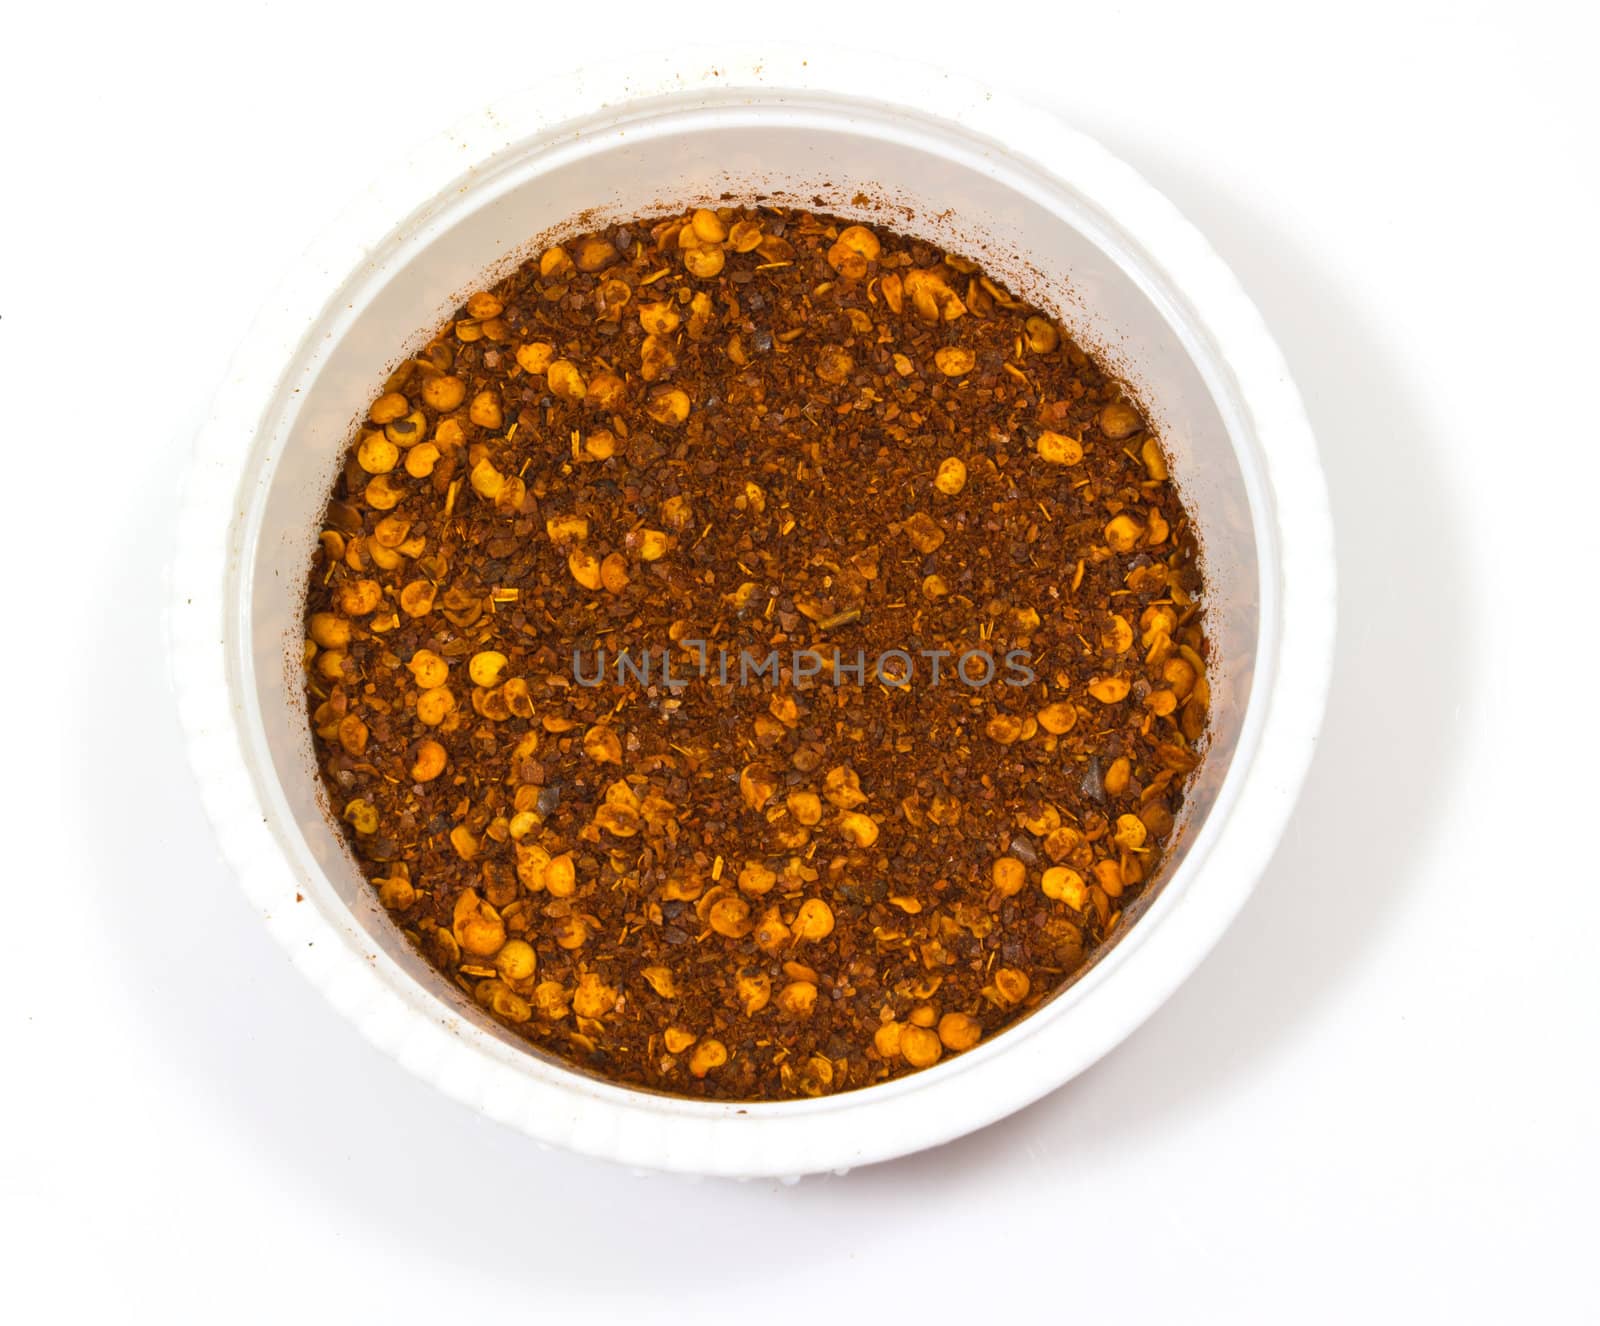 Paprika ground in a white bowl on white background.